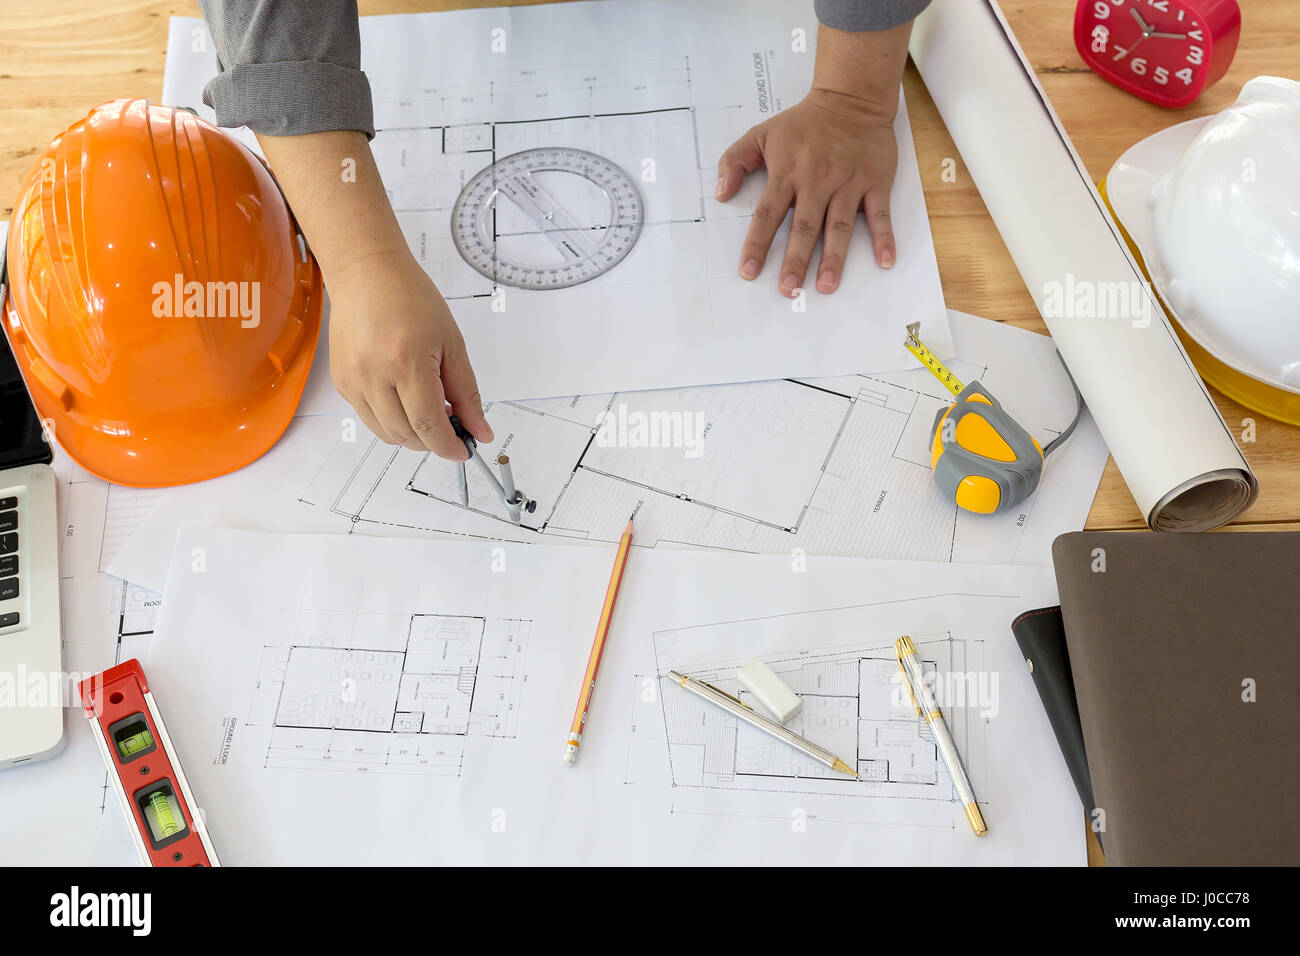 Architect working on blueprint. Architects workplace - architectural project, blueprints, ruler, calculator, laptop and divider compass. Construction  Stock Photo